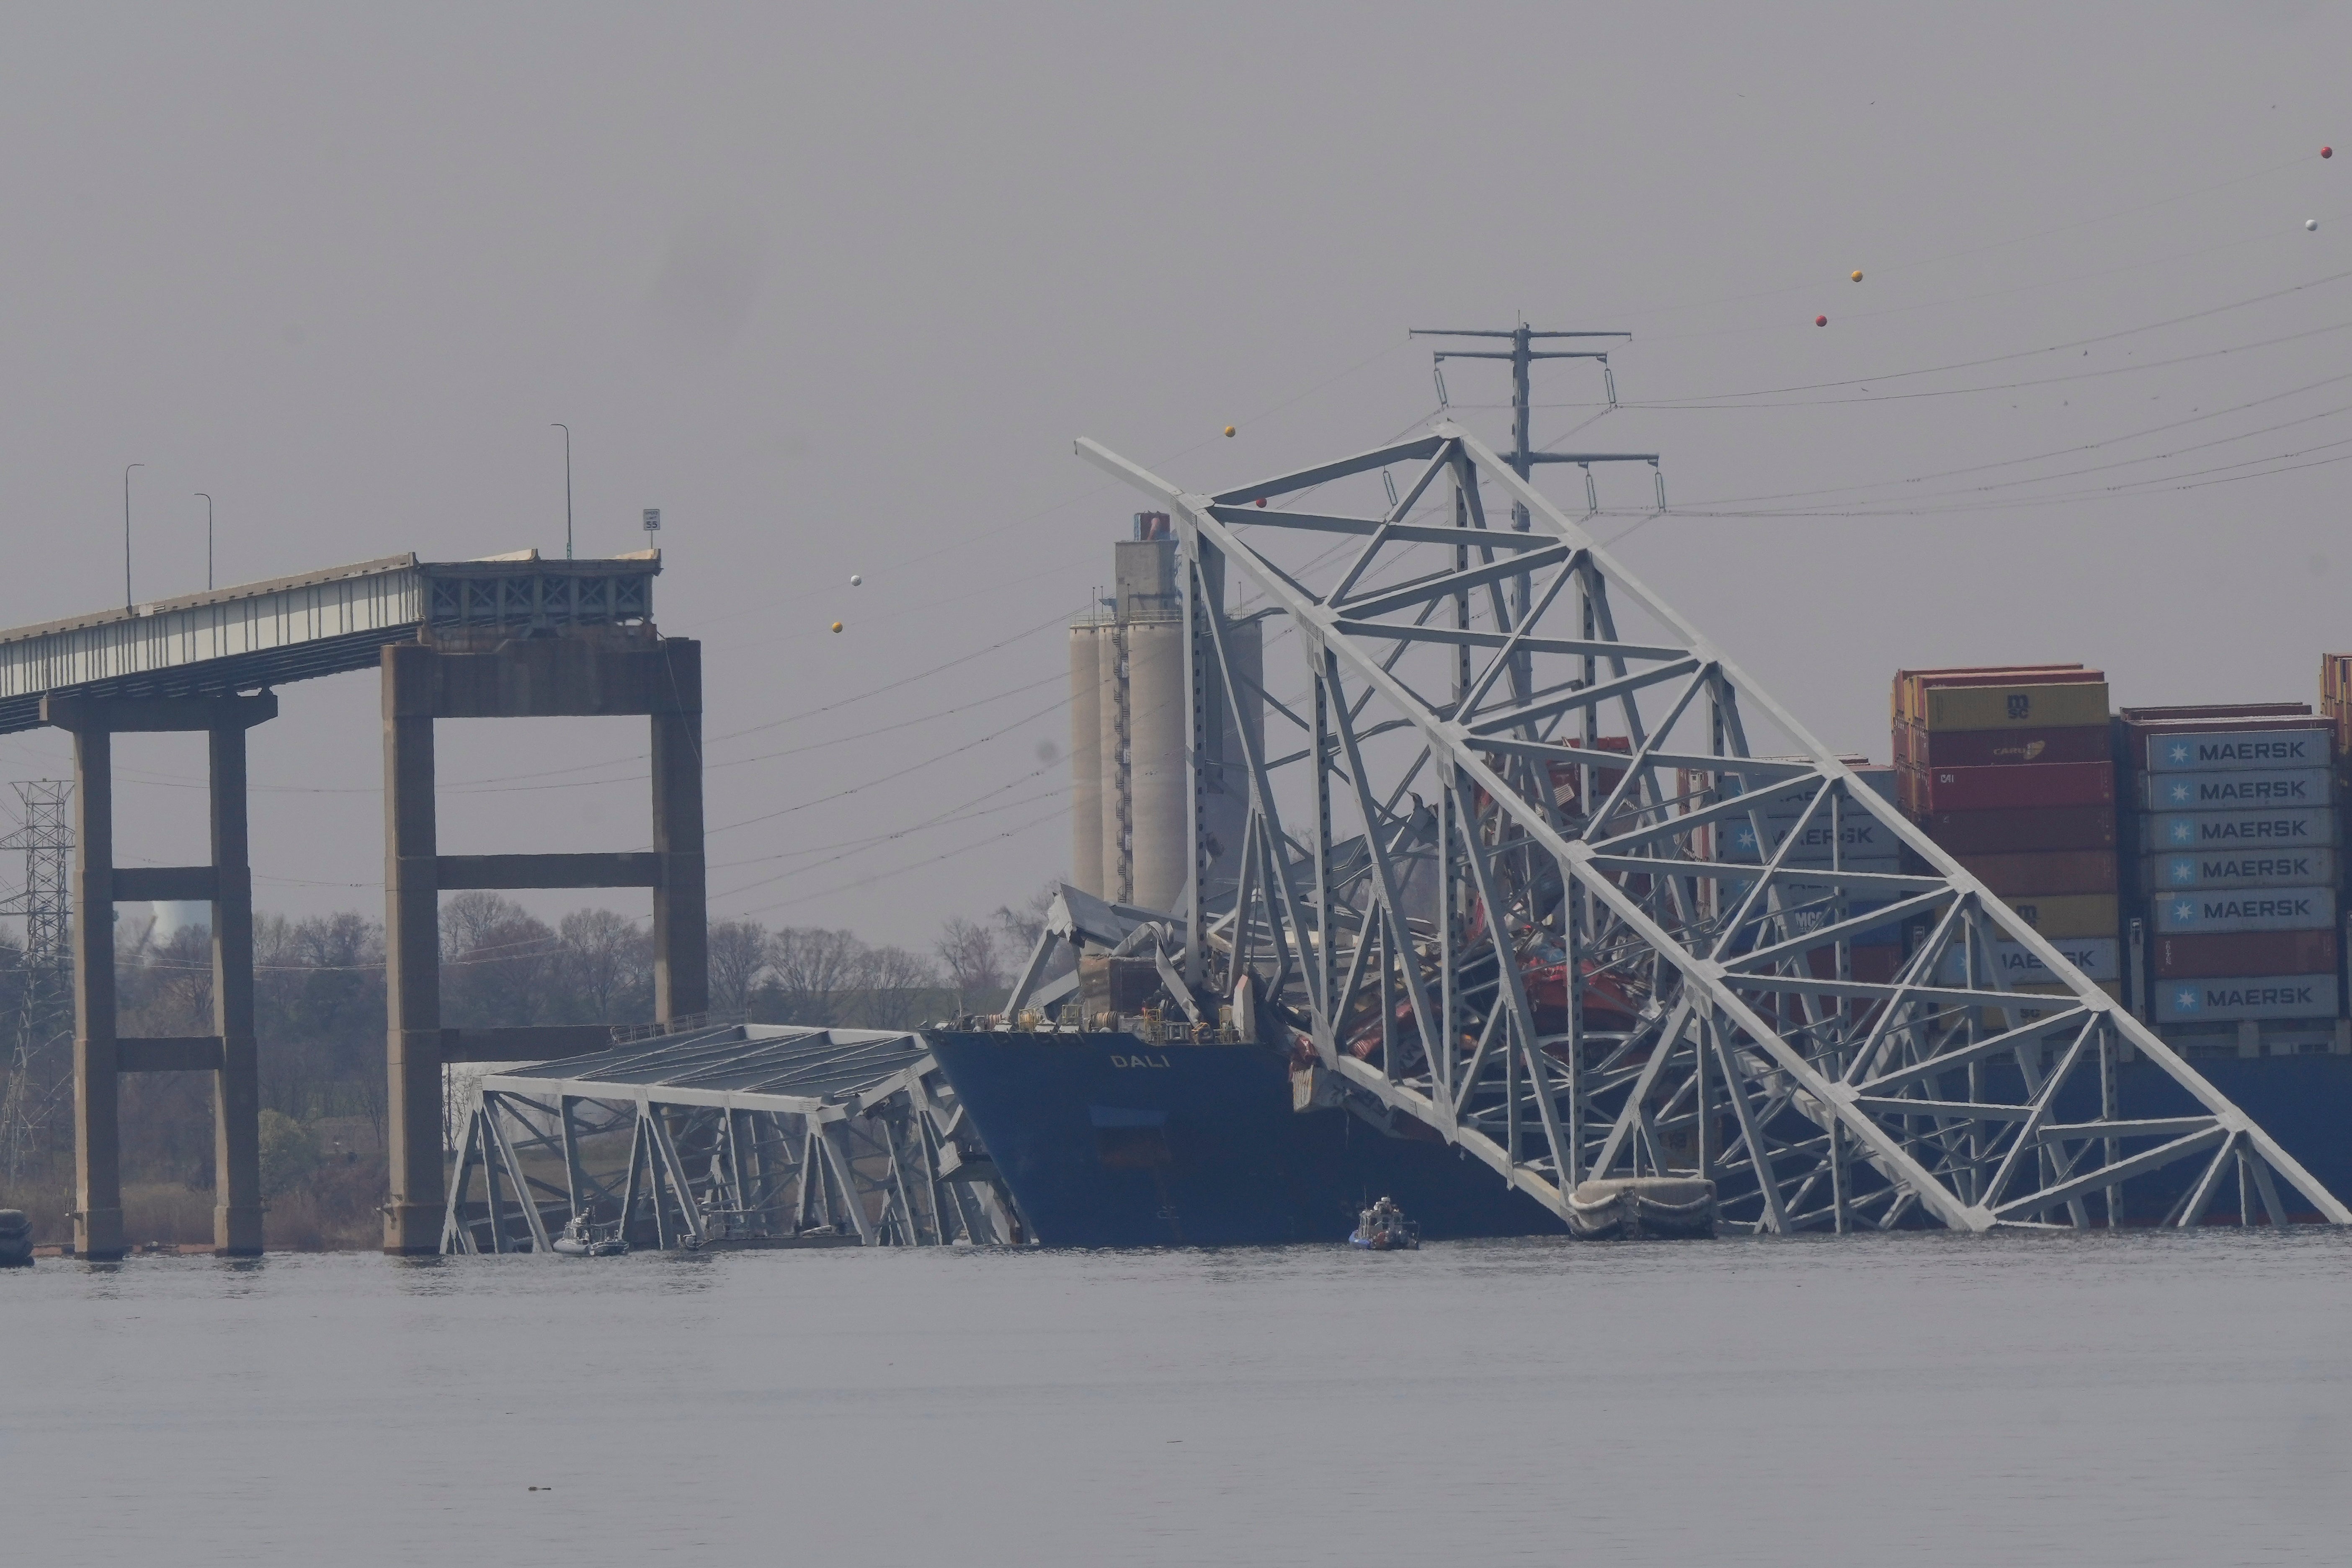 The container ship Dali rests against wreckage of the Francis Scott Key Bridge